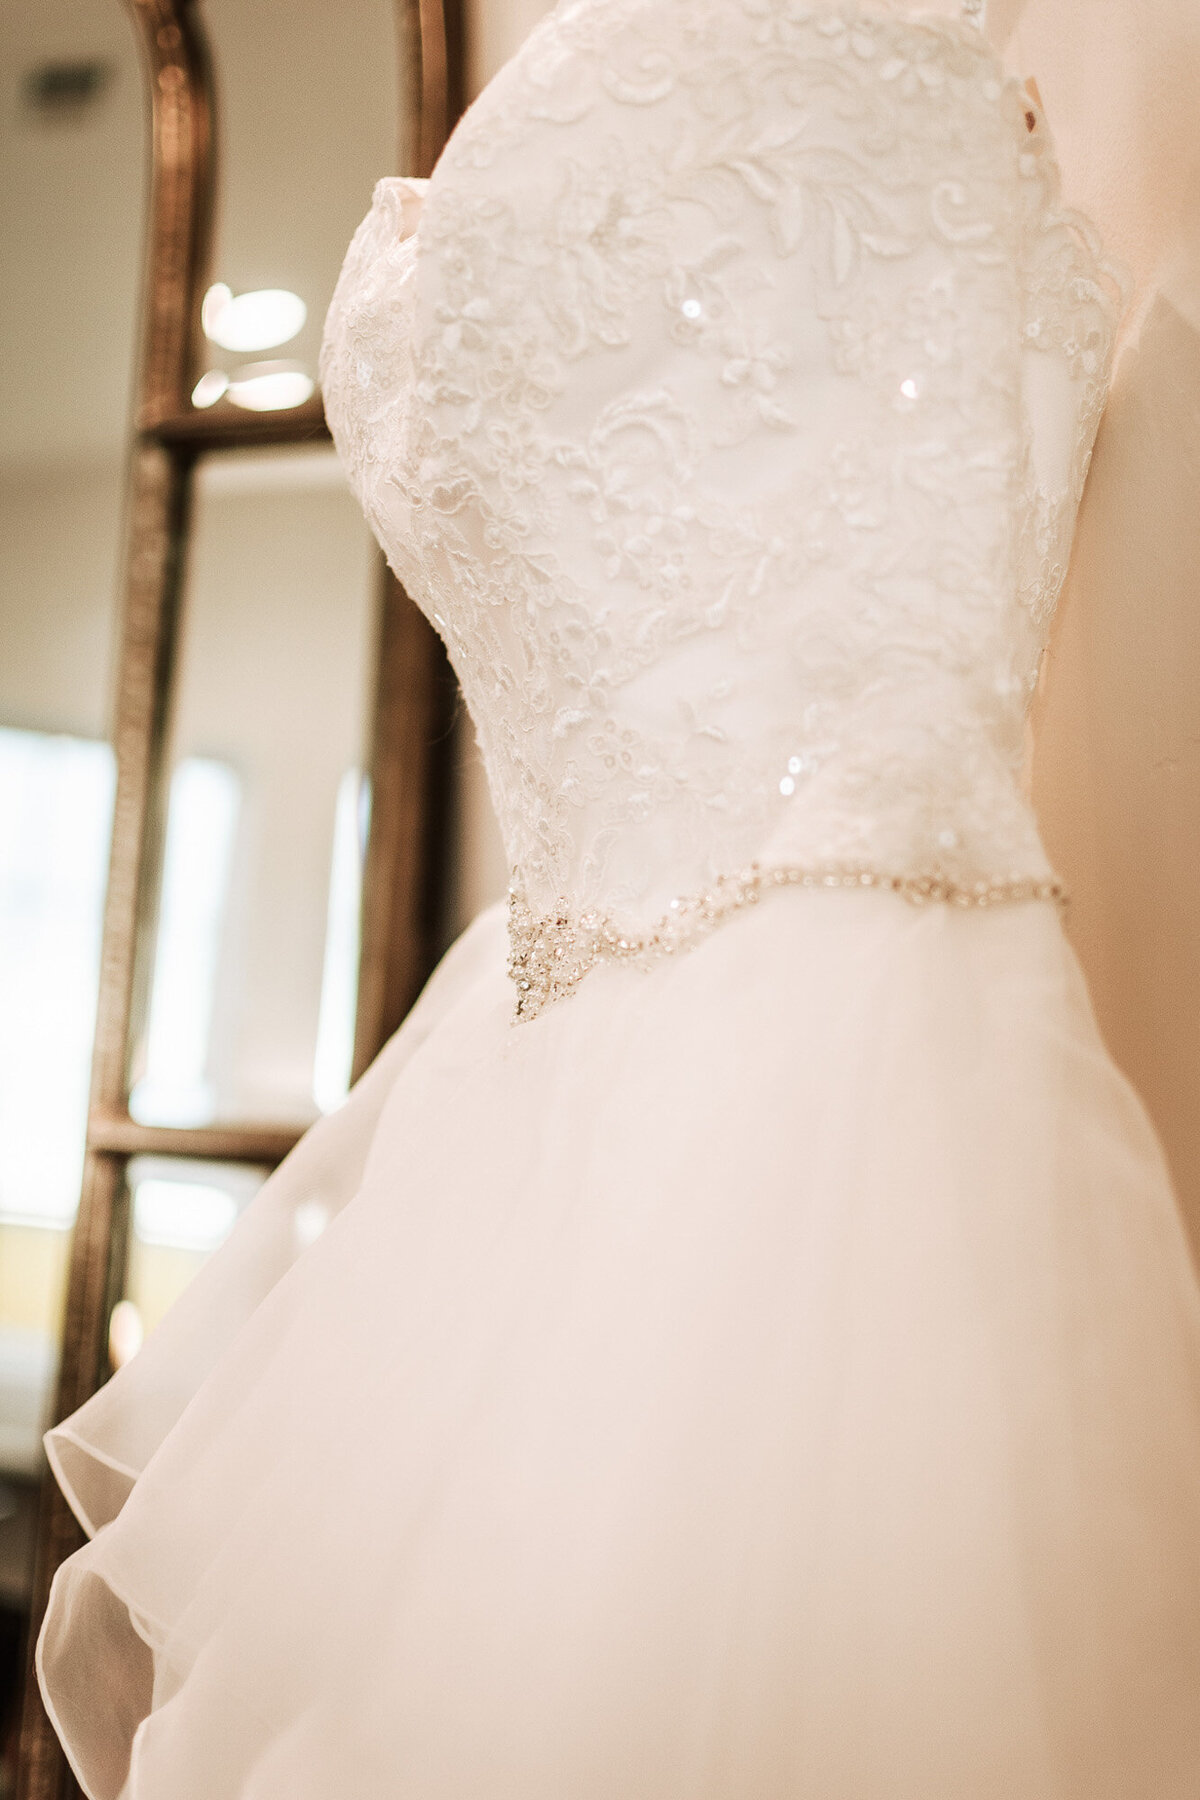 Beautiful details of a wedding gown